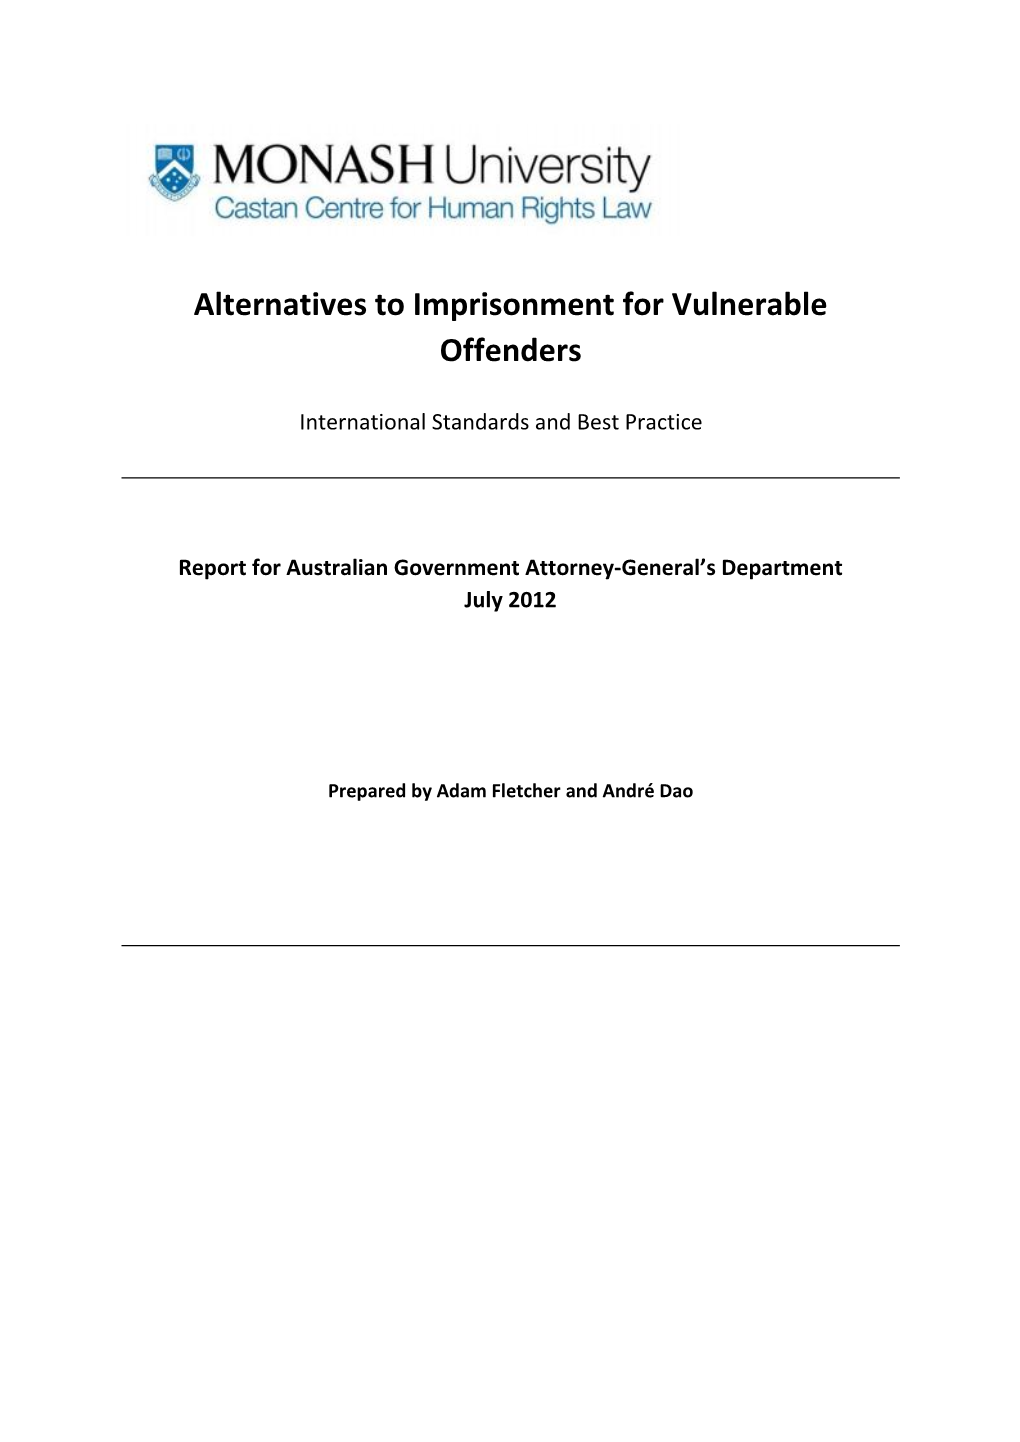 Alternatives to Imprisonment for Vulnerable Offenders